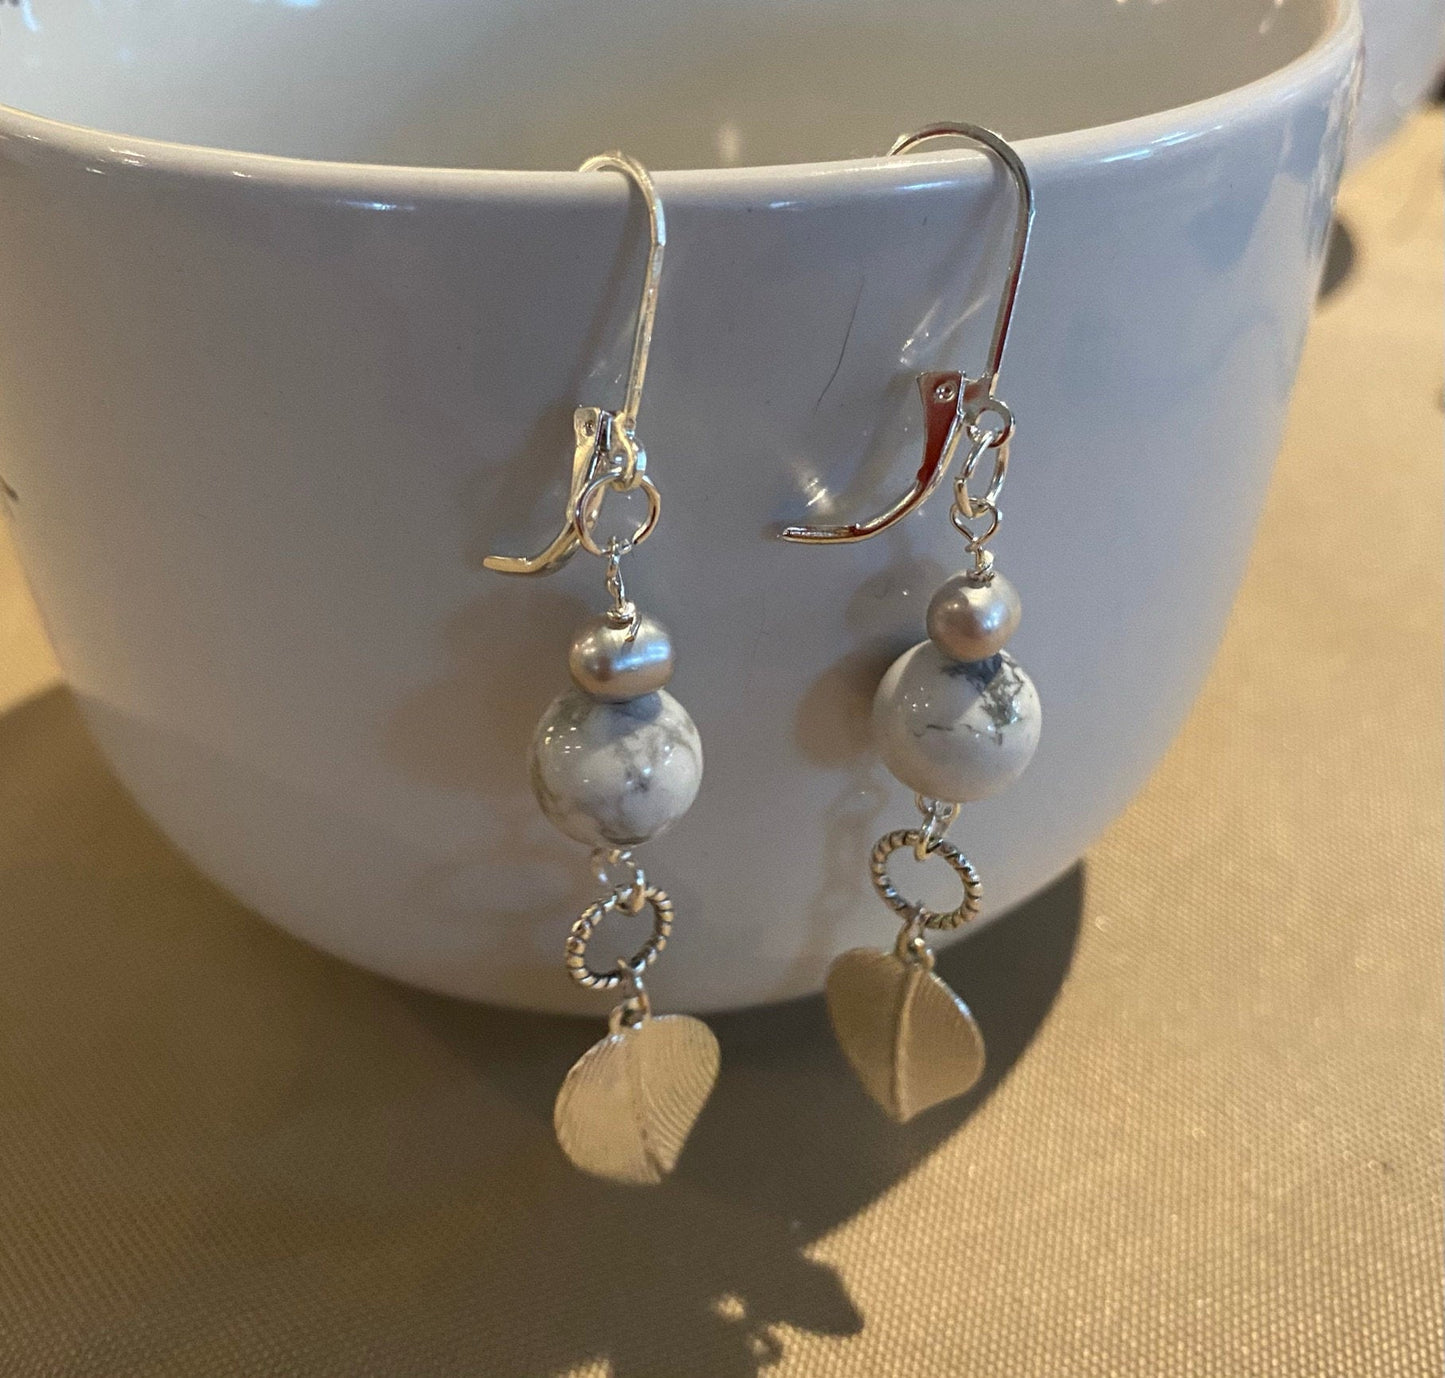 White and gray beads, freshwater pearls, silver leaves, lever hook back, earrings